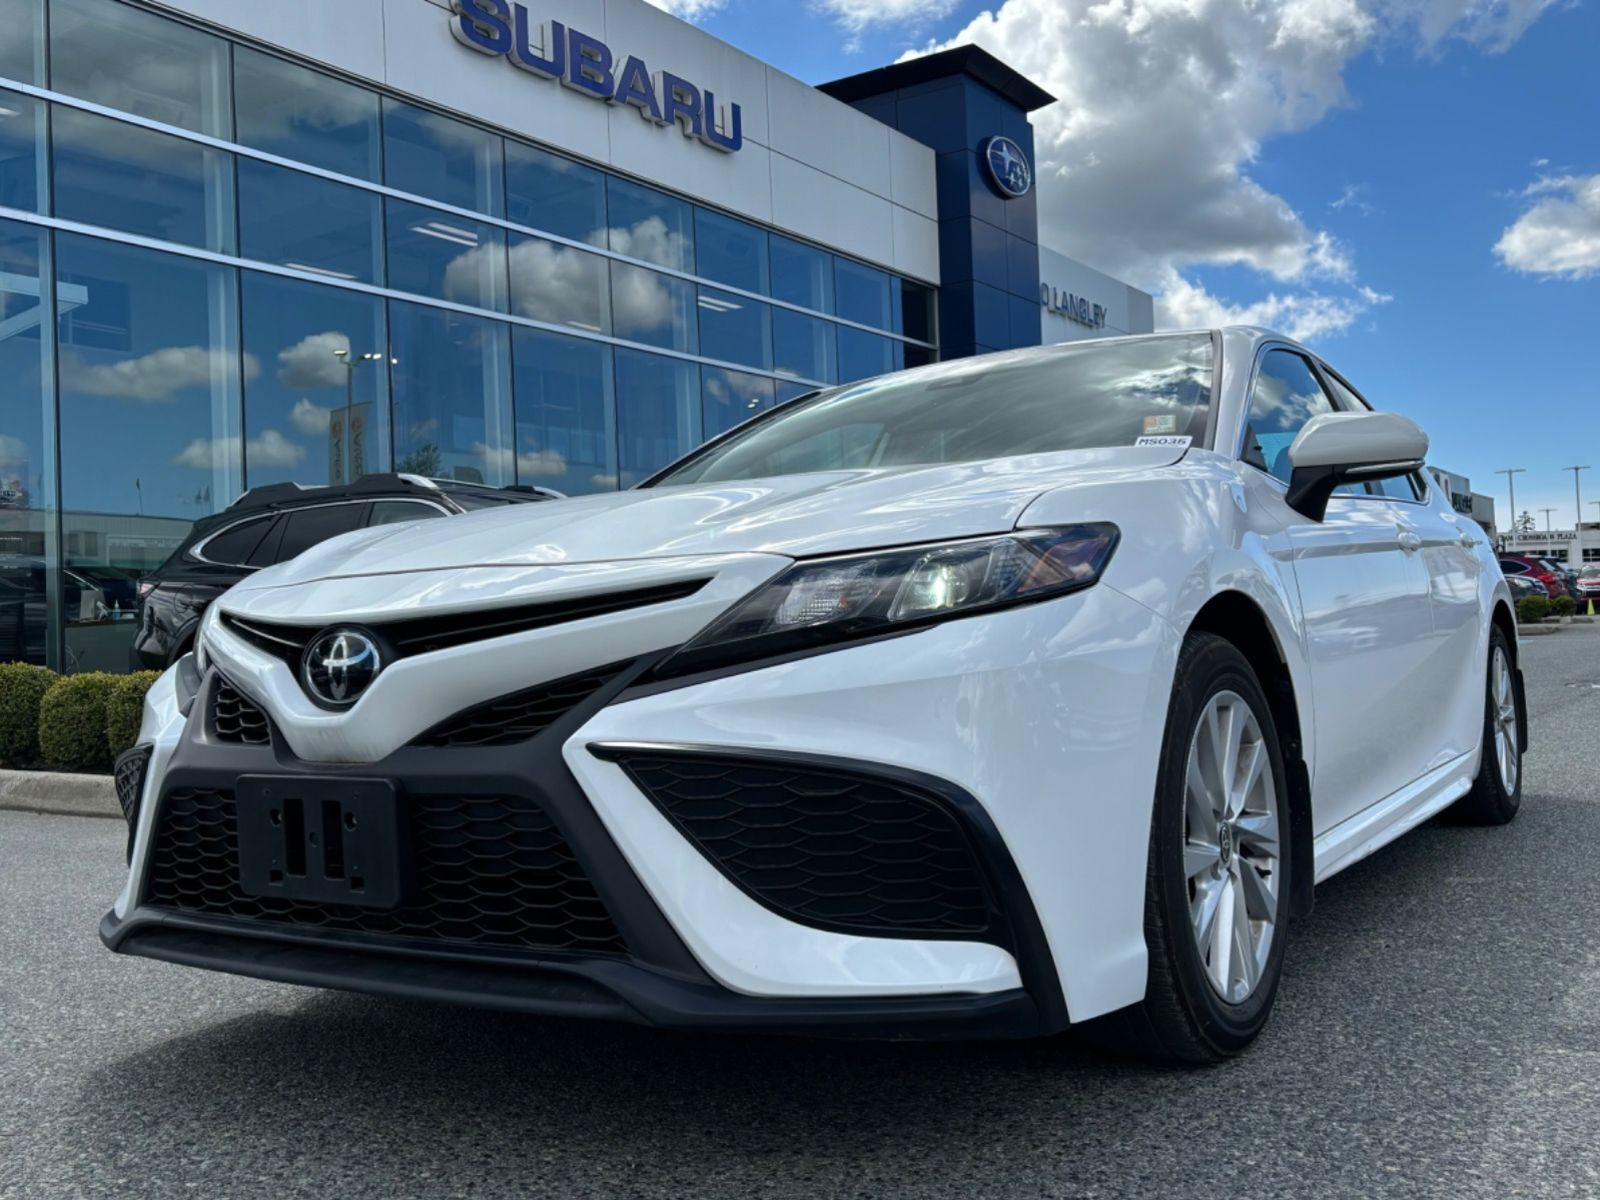 2021 Toyota Camry CLEAN CARFAX | LEATHER SEATS | HEATED SEATS | NAVI